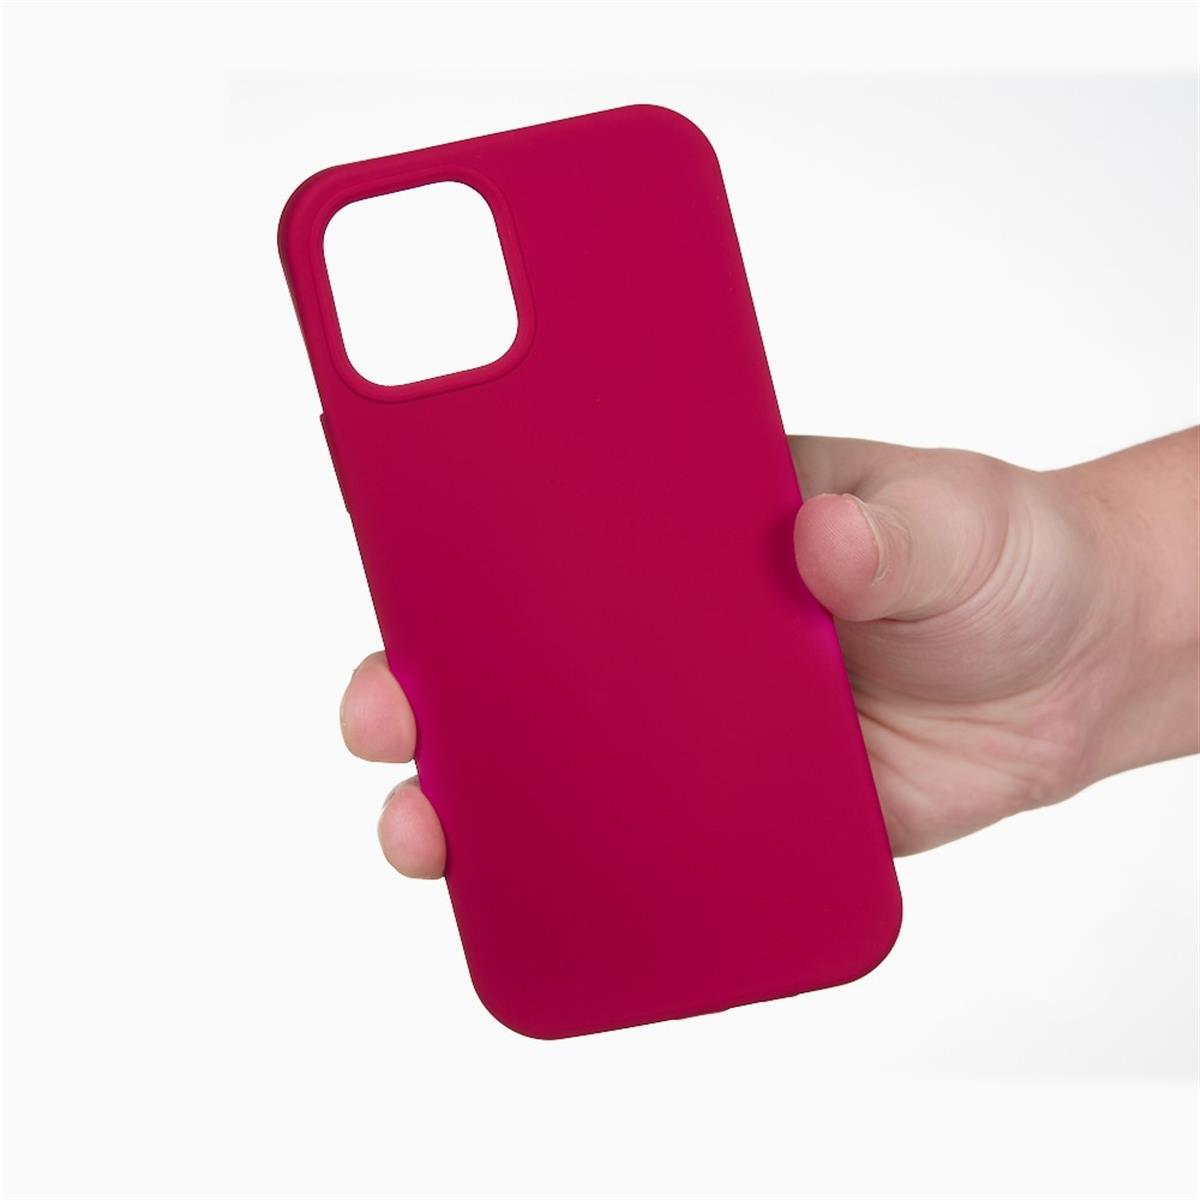 COVERKINGZ Handycase aus Rot Zoll], Max [6,7 Apple, Pro iPhone 13 Backcover, Silikon